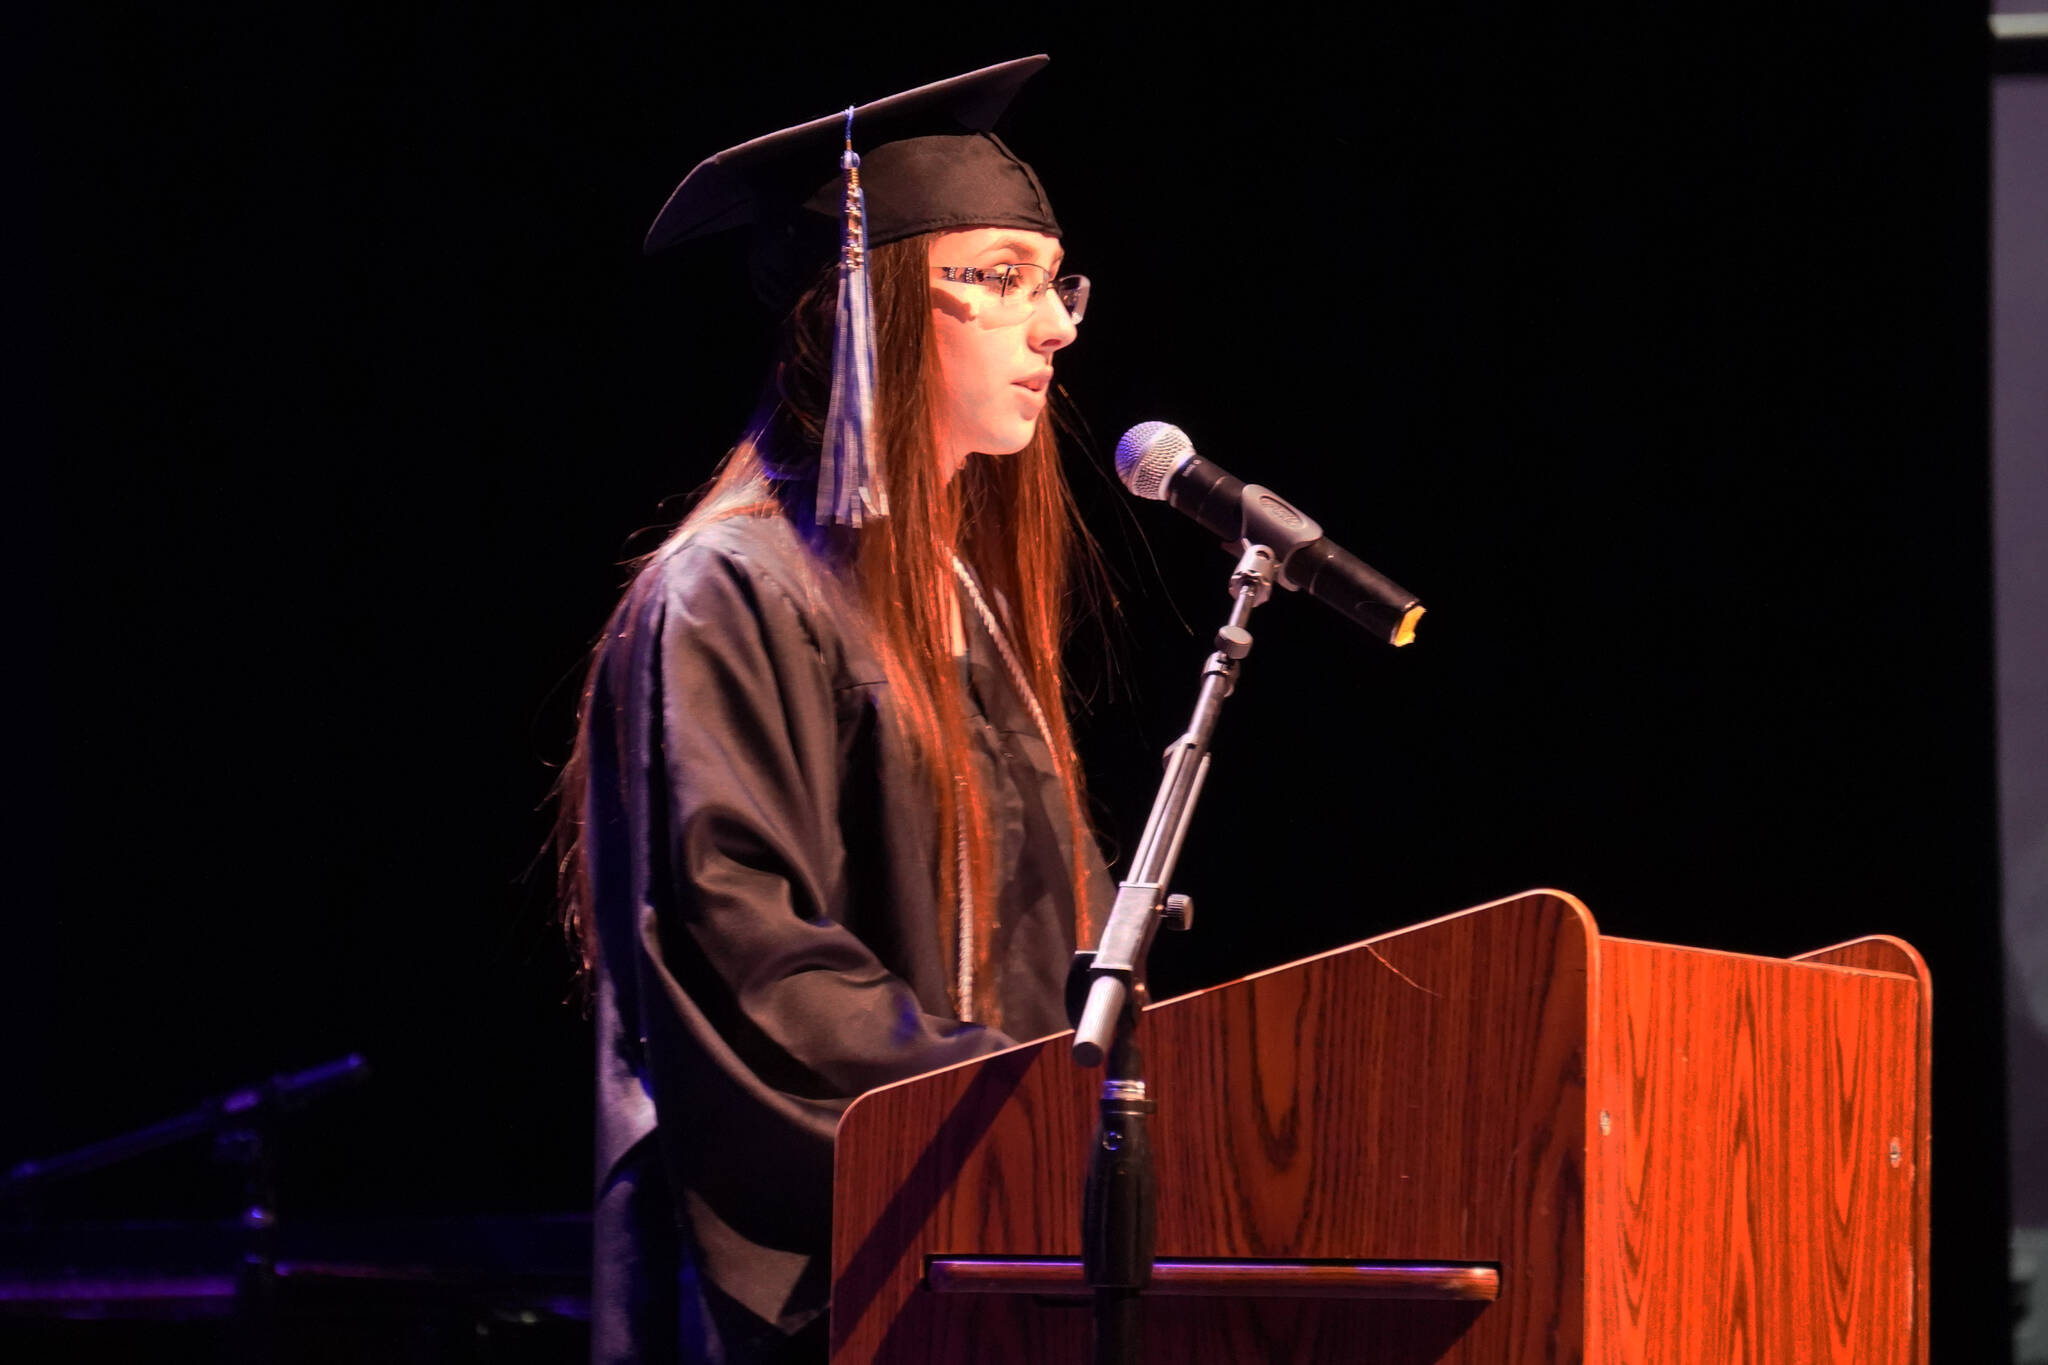 Willow Rediske recites a poem during the Connections Homeschool graduation ceremony on Thursday, May 18, 2023, at Soldotna High School in Soldotna, Alaska. (Jake Dye/Peninsula Clarion)